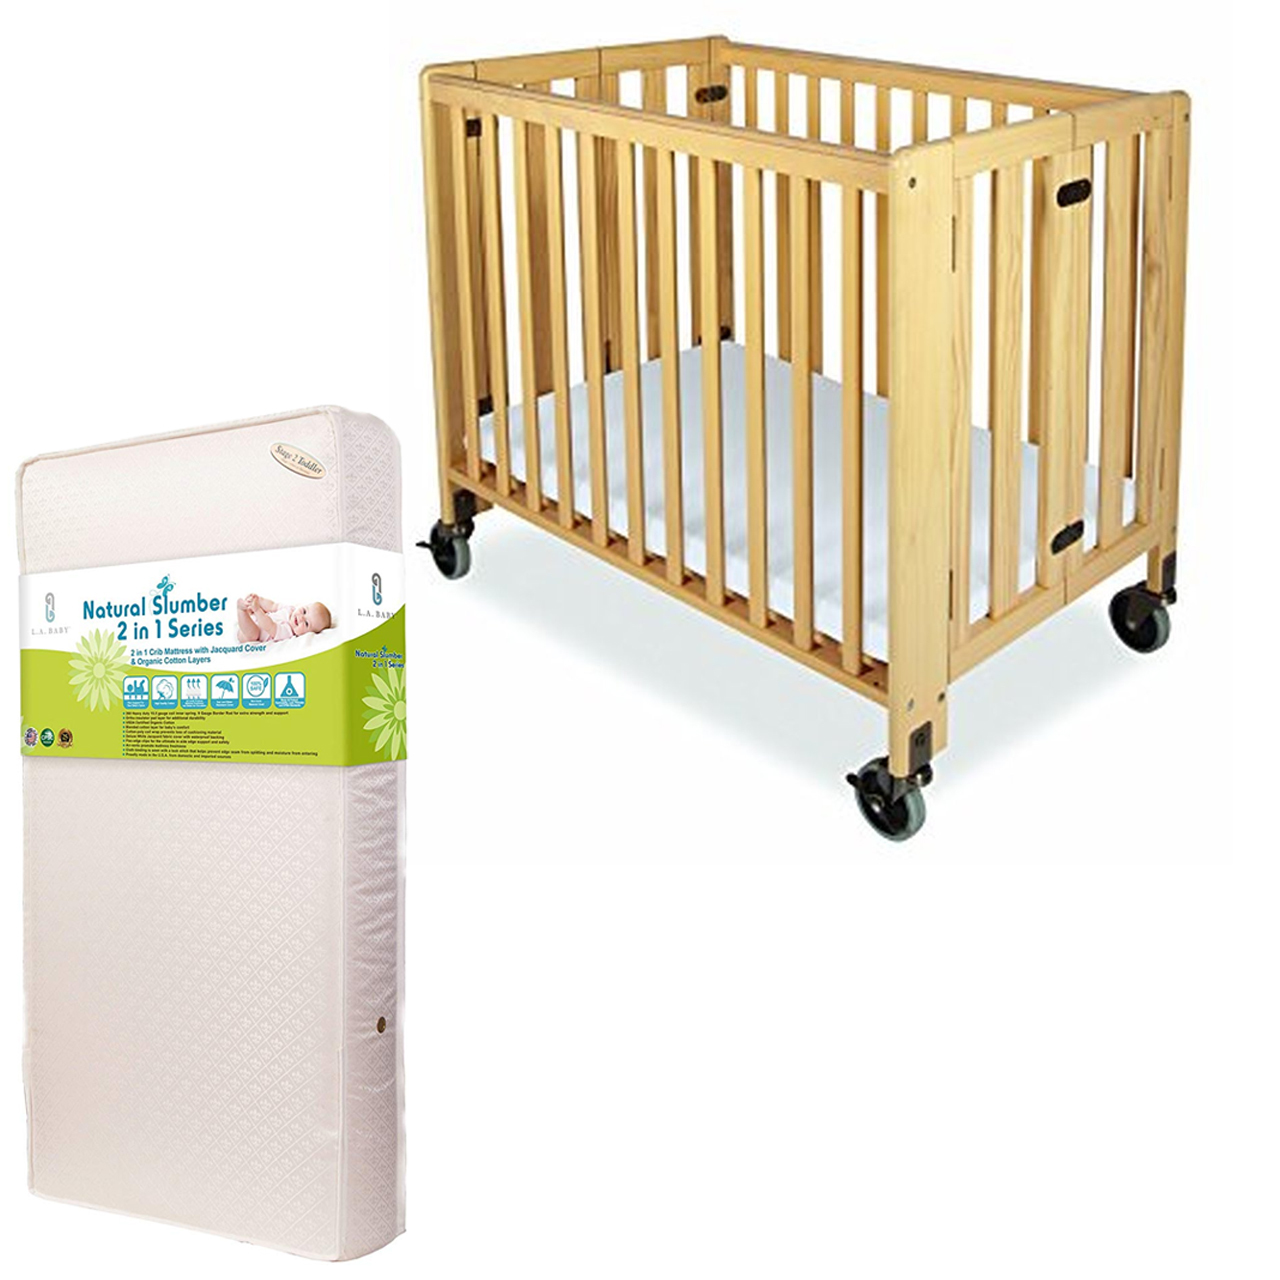 PACKAGE 8 (COMPACT CRIB)